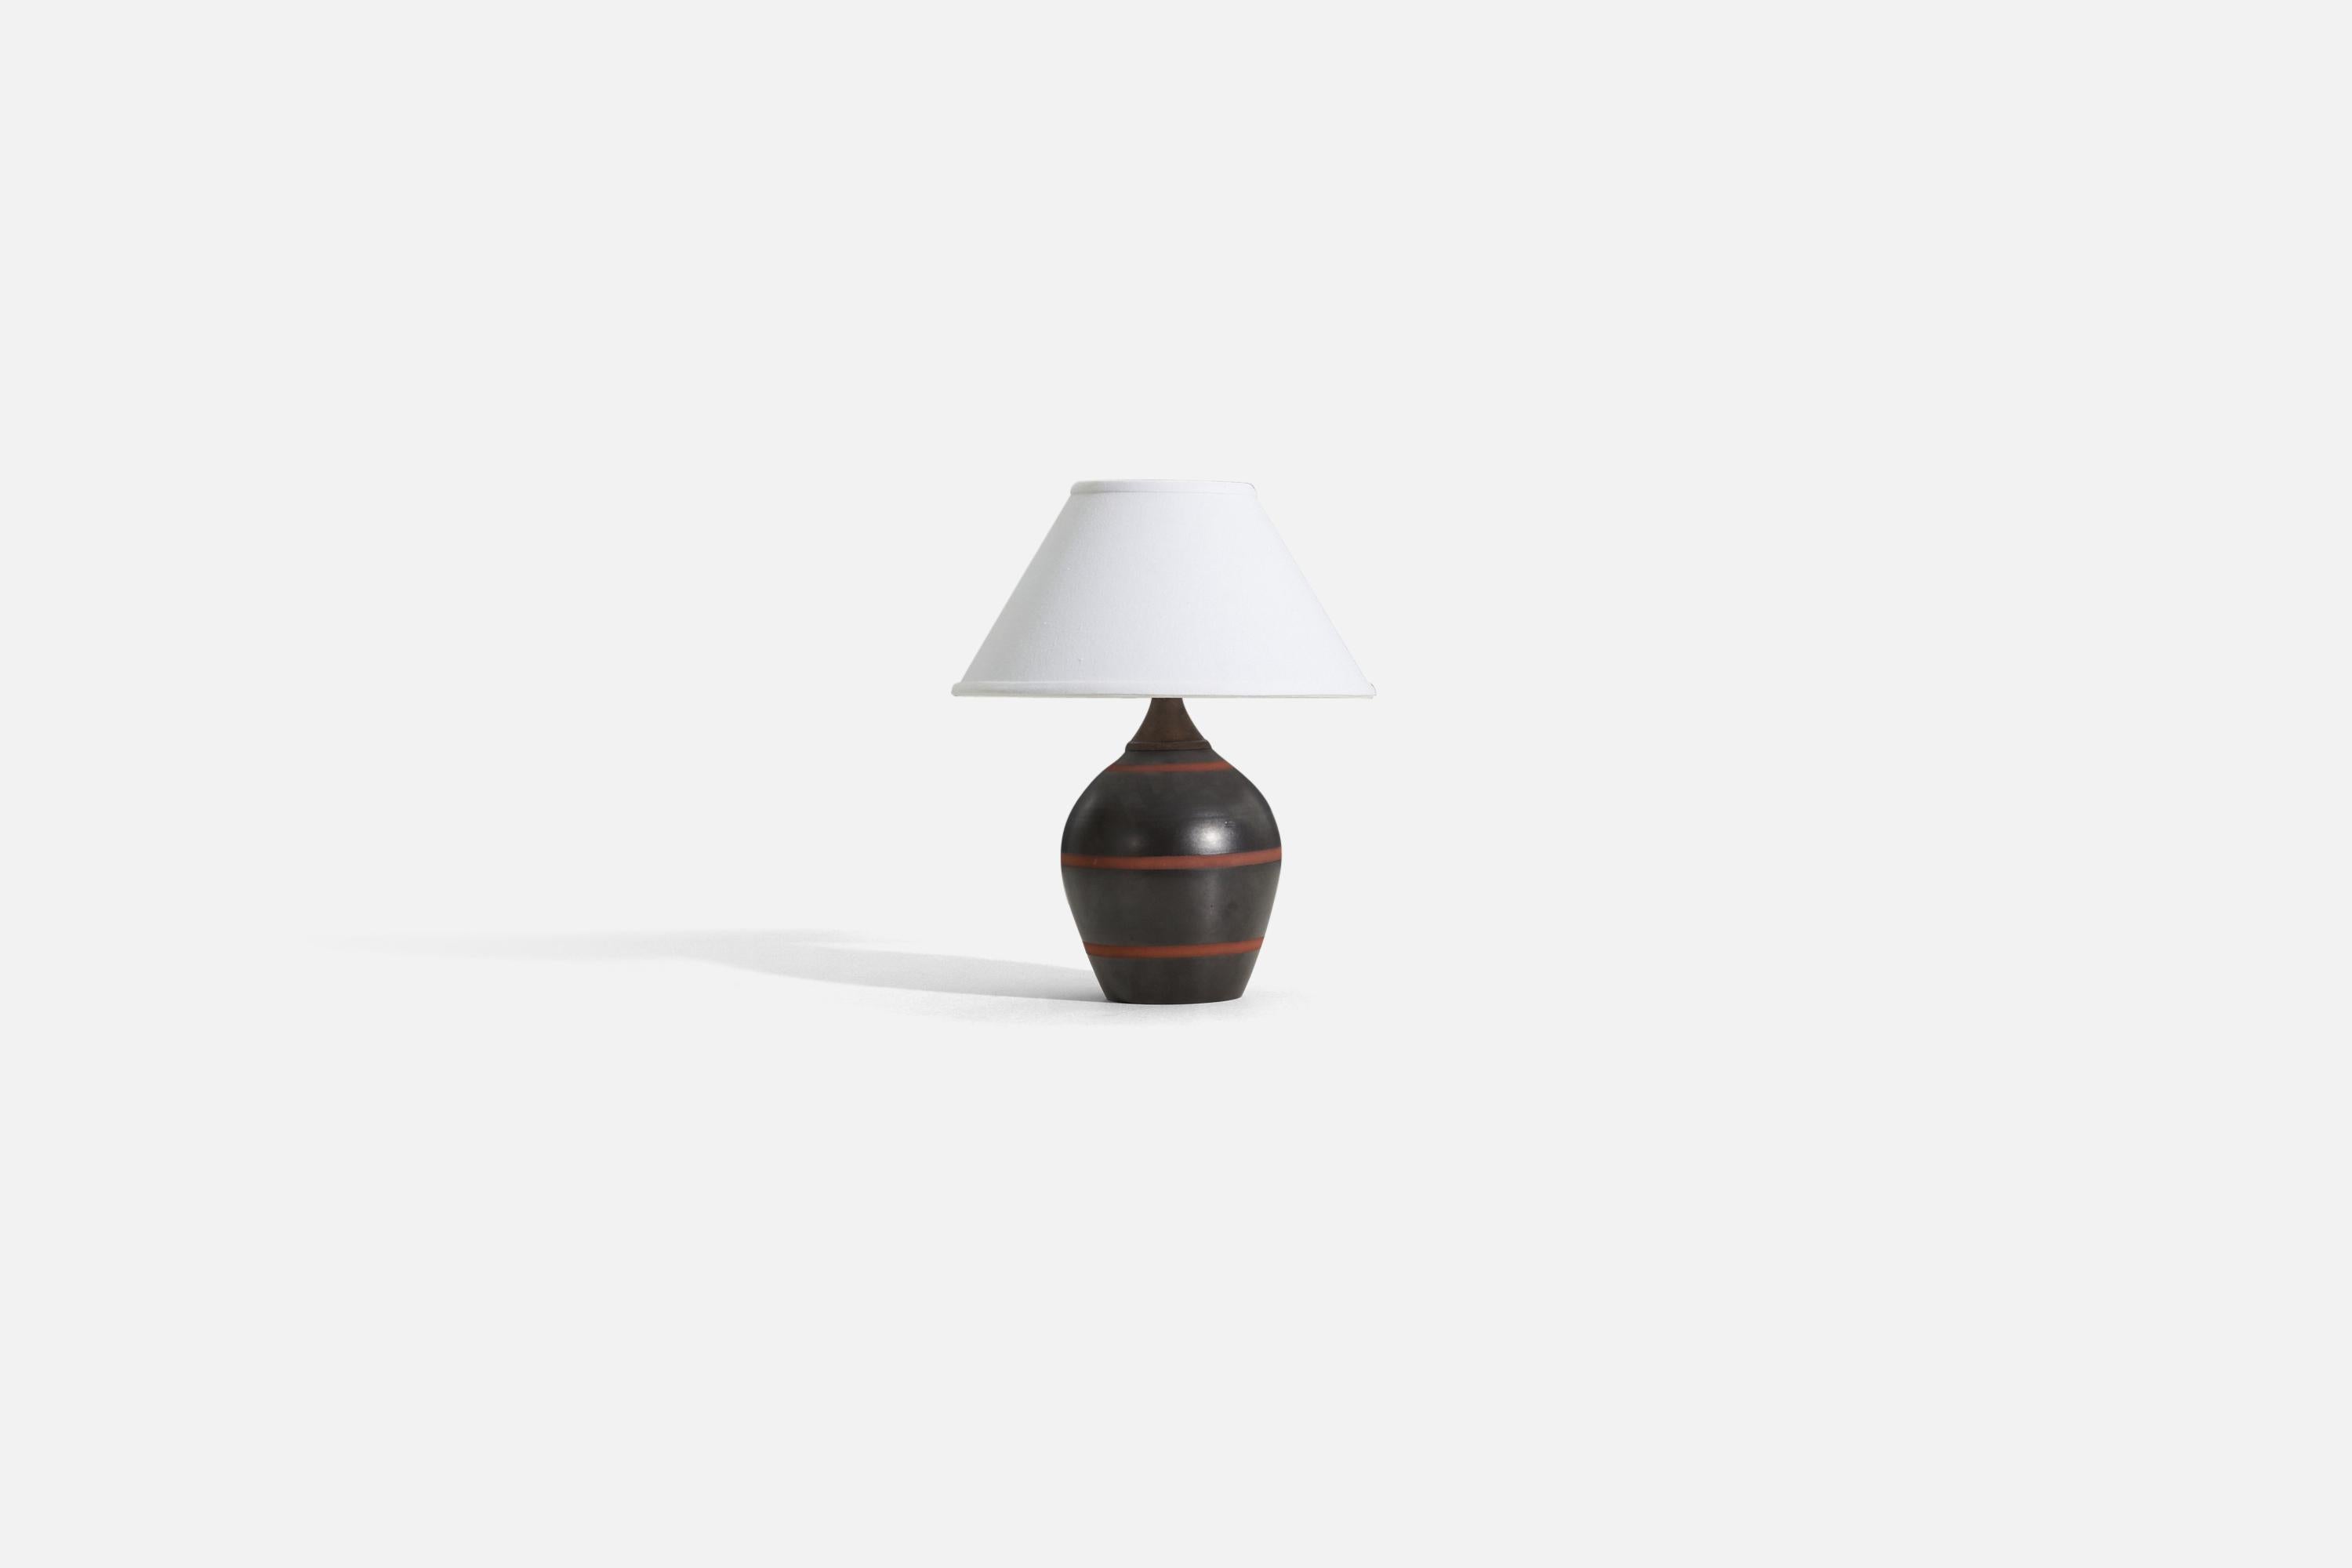 A brown ceramic table lamp designed by Jerk Werkmäster produced by Nittsjö, Sweden, 1940s.

Sold without lampshade. 
Dimensions of Lamp (inches) : 12.5 x 6.5 x 6.5 (H x W x D)
Dimensions Shade (inches) : 5 x 12.25 x 7.25 (T x B x H)
Dimension